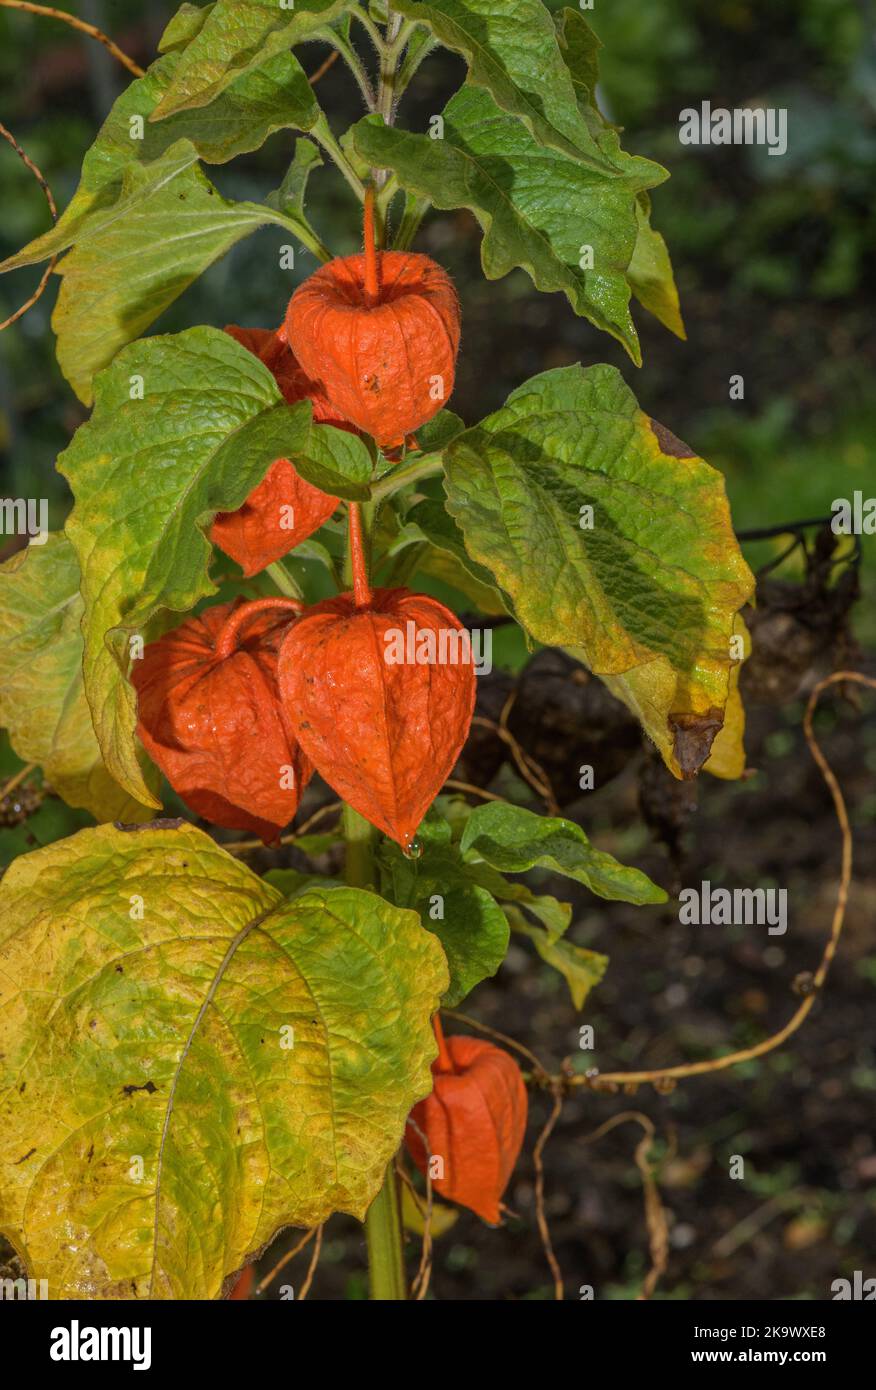 The ripe fruits of Chinese Lantern plant, Physalis alkekengi, each surrounded by an orange papery calyx. Autumn. Stock Photo